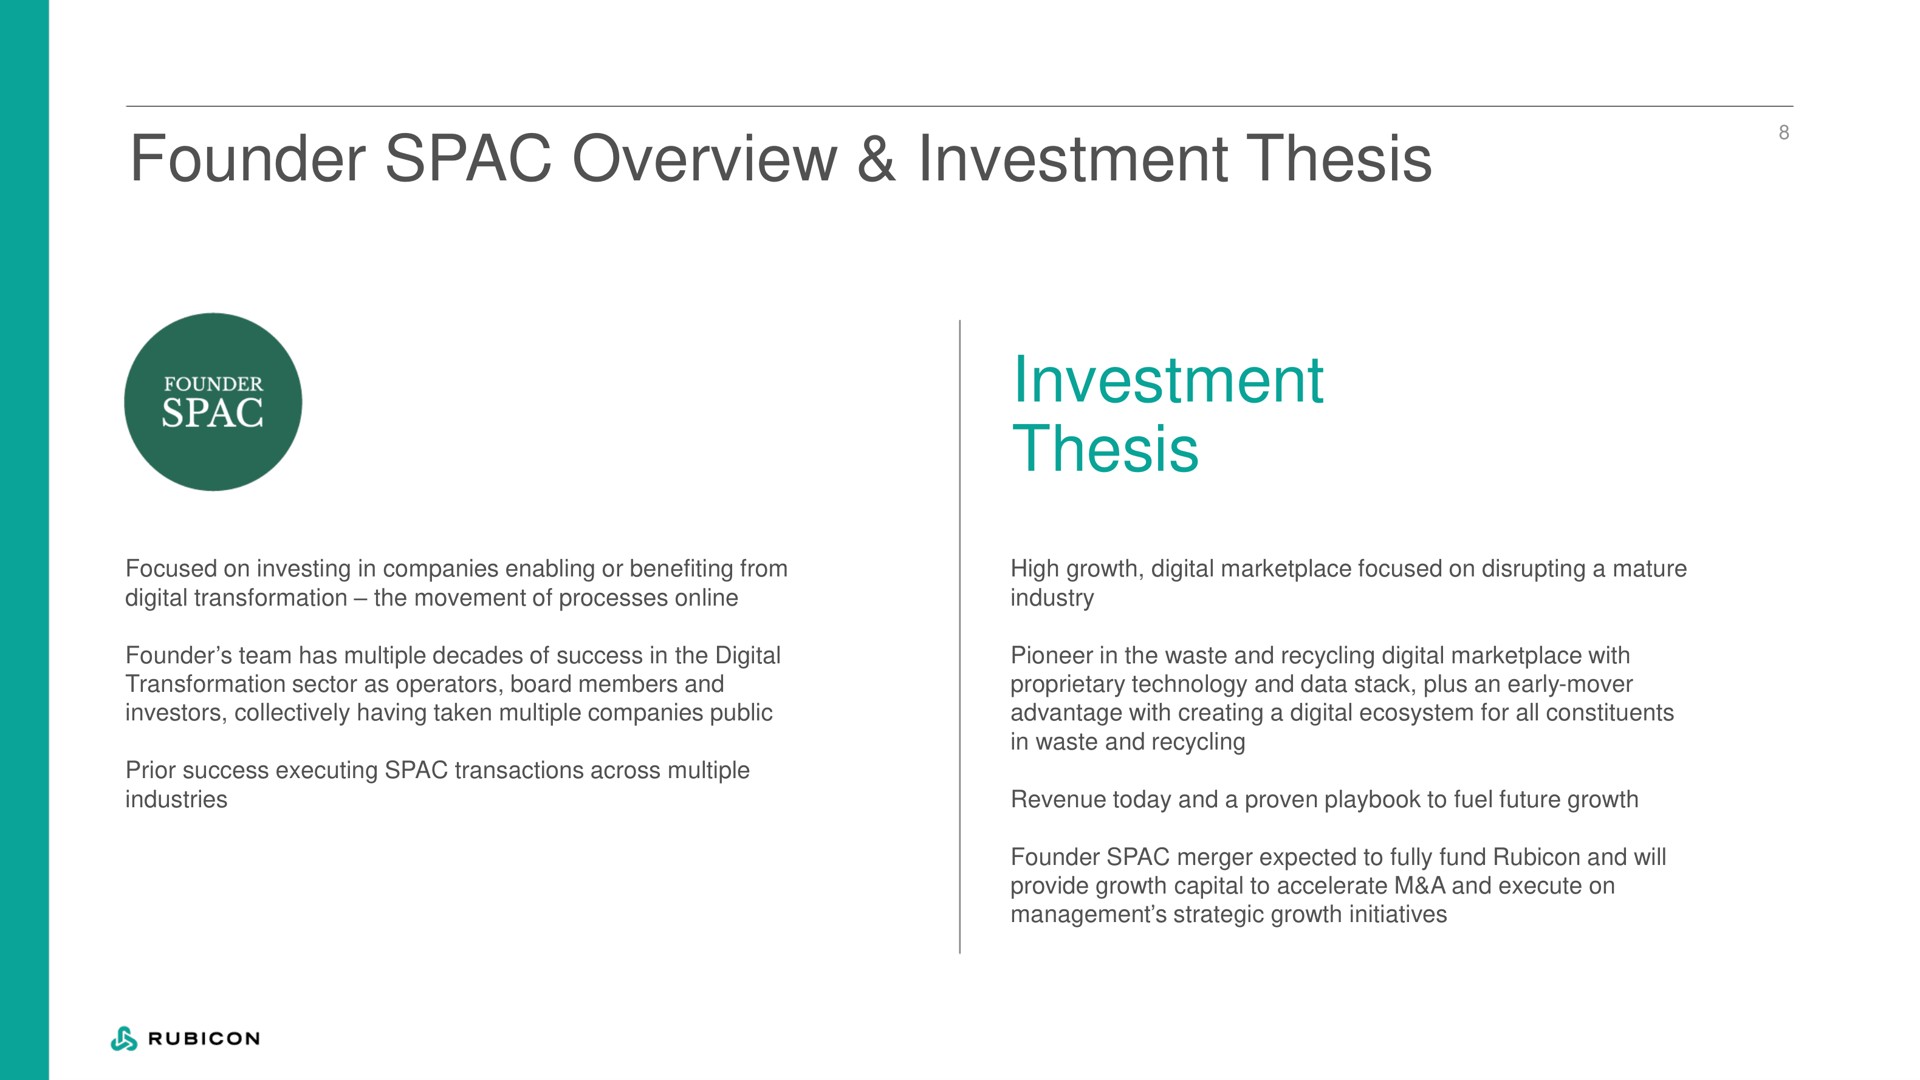 founder overview investment thesis investment thesis | Rubicon Technologies